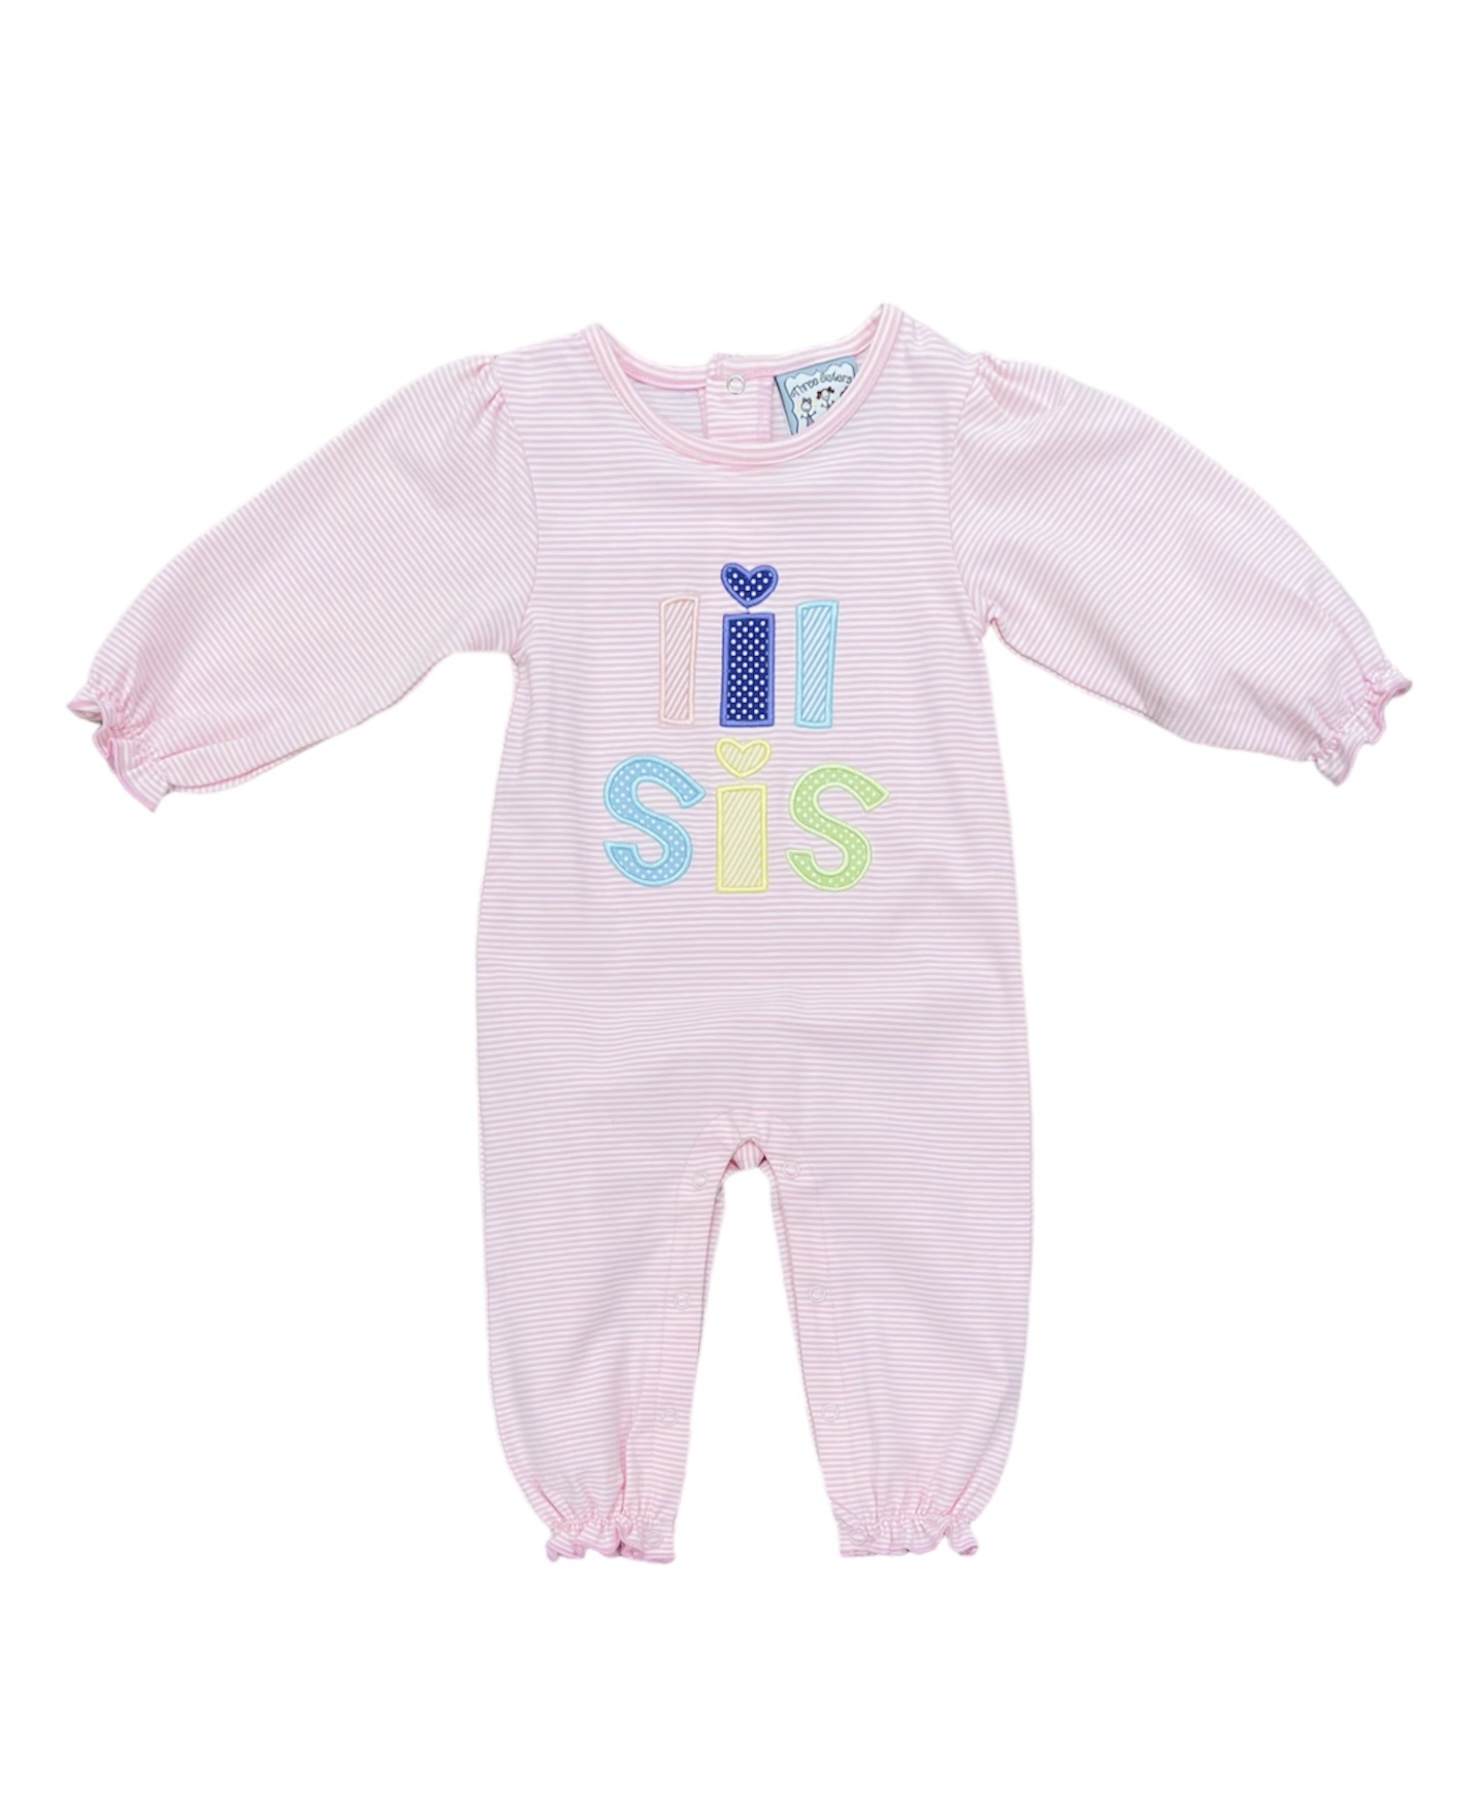 Three Sisters Pink/White Lil Sis Applique Girls Romper